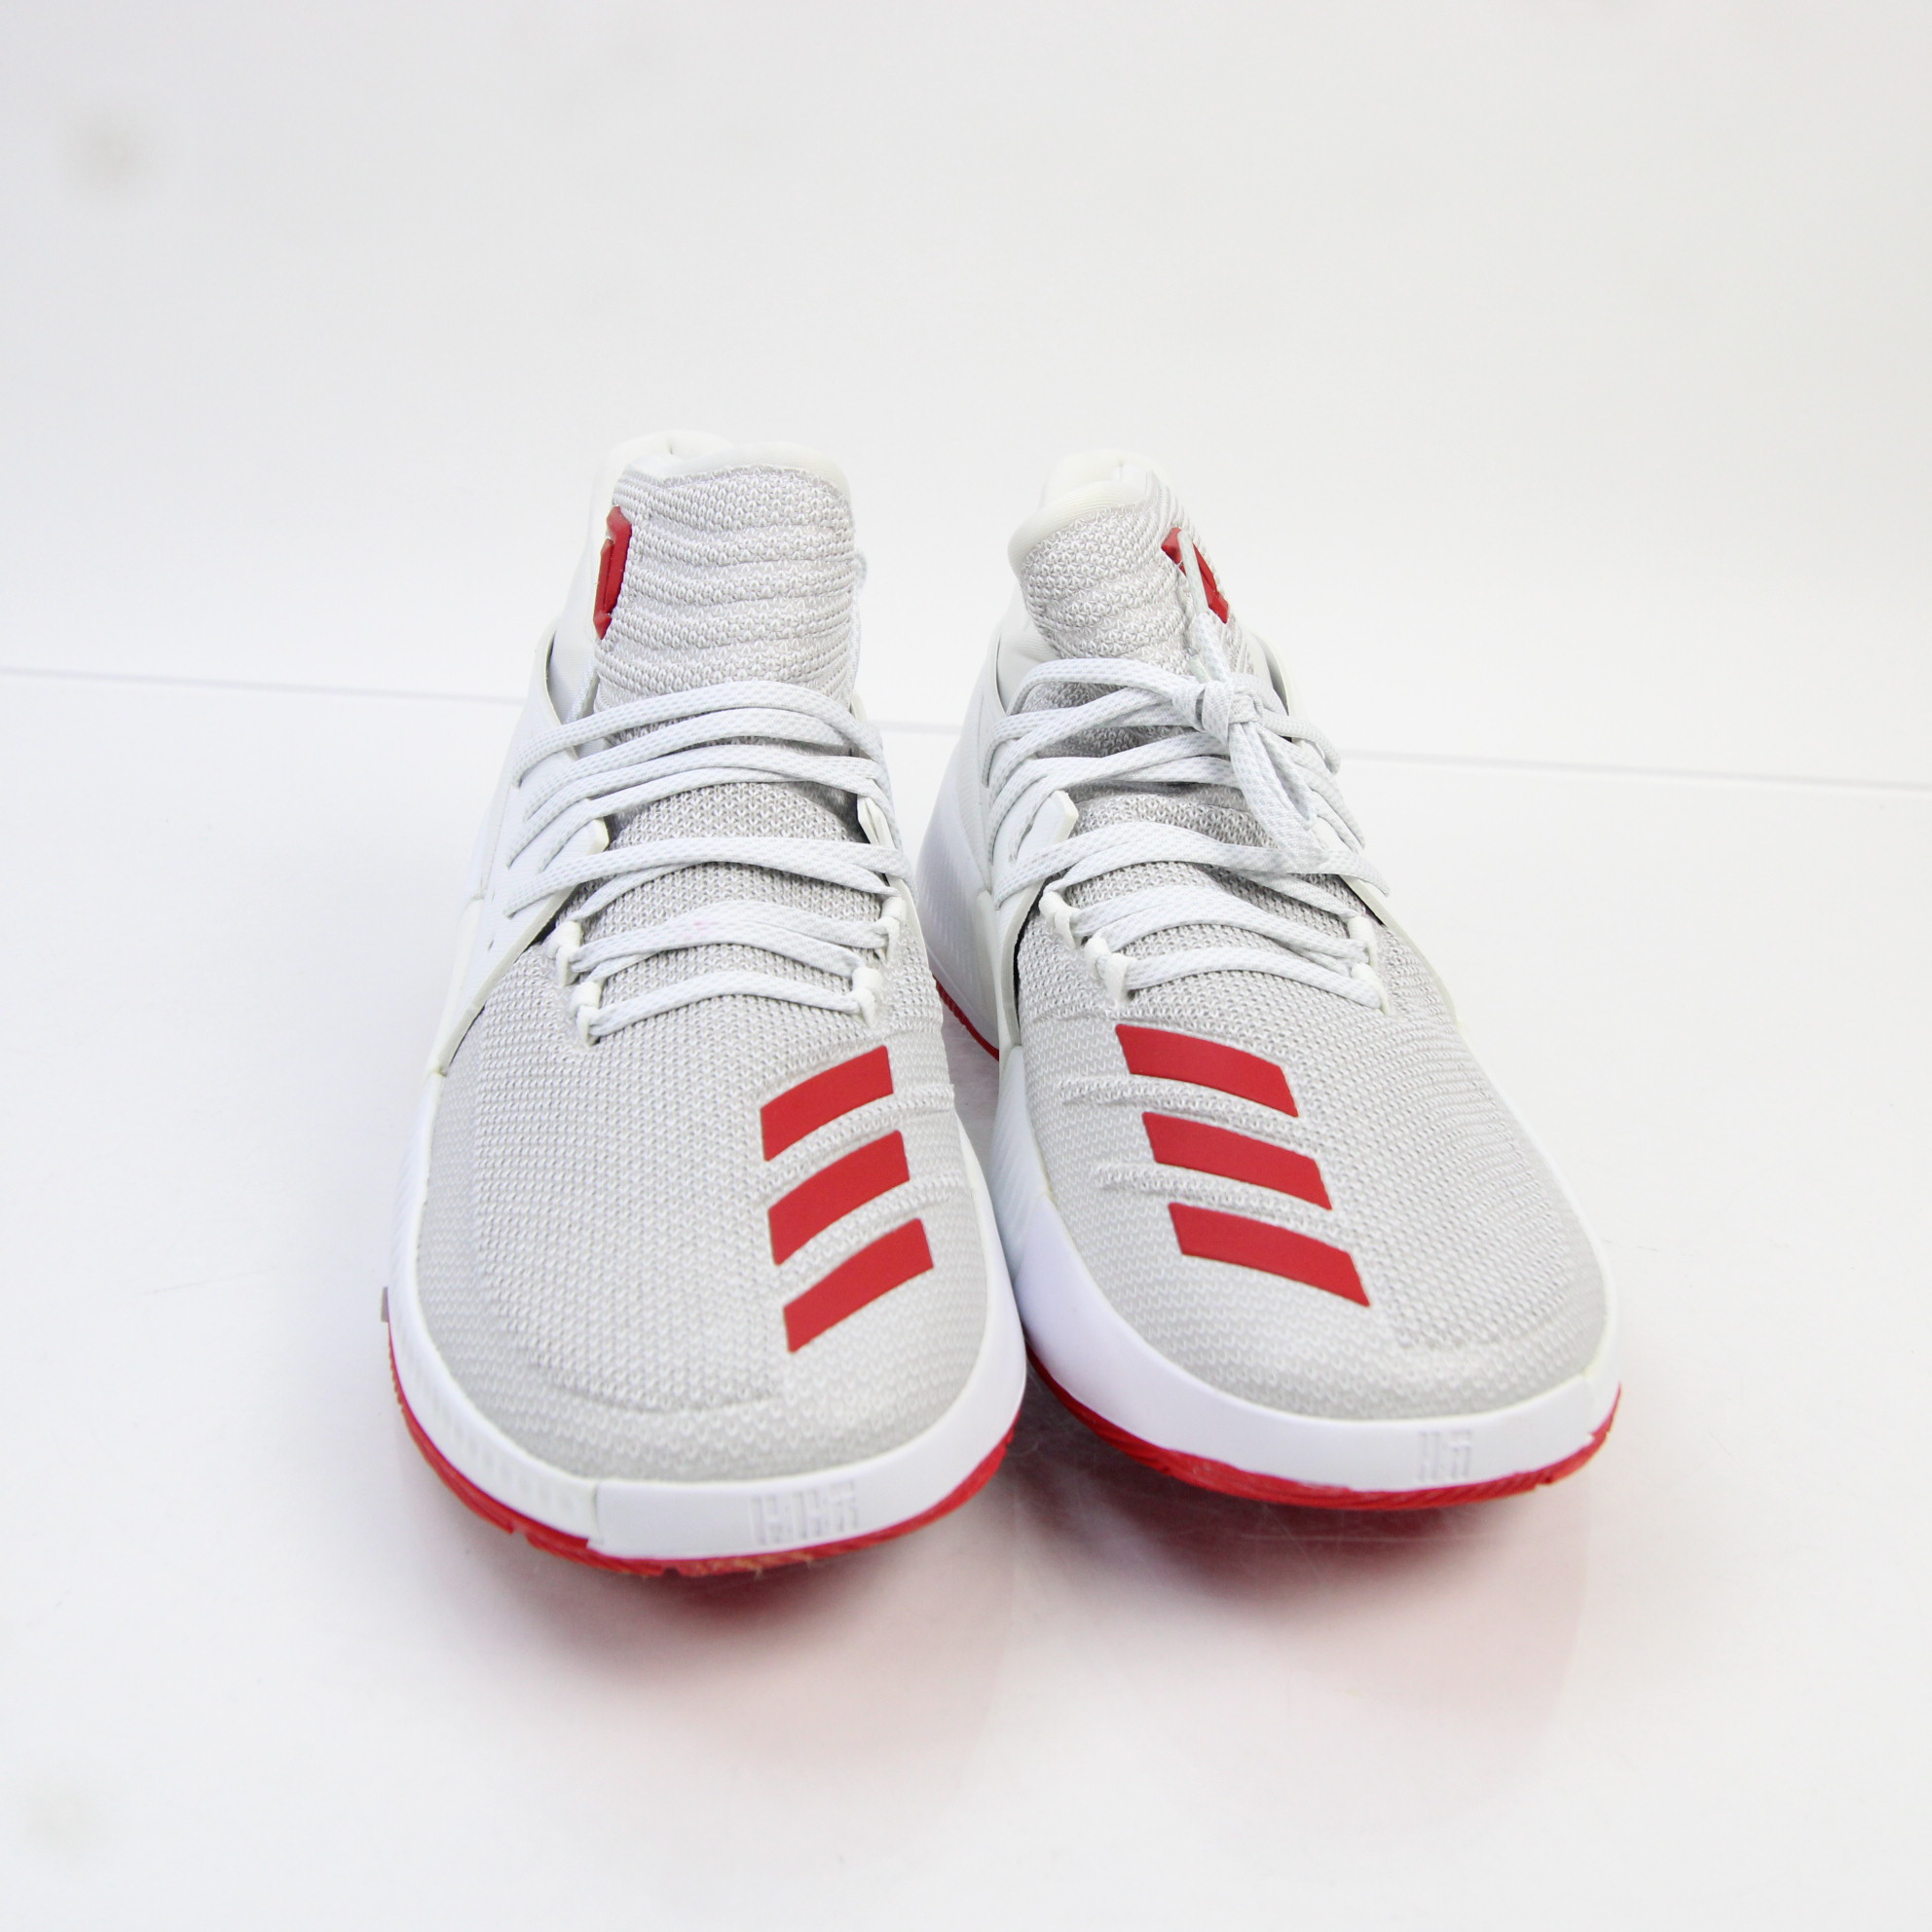 adidas Basketball Shoe Men's White/Red New without Box | eBay